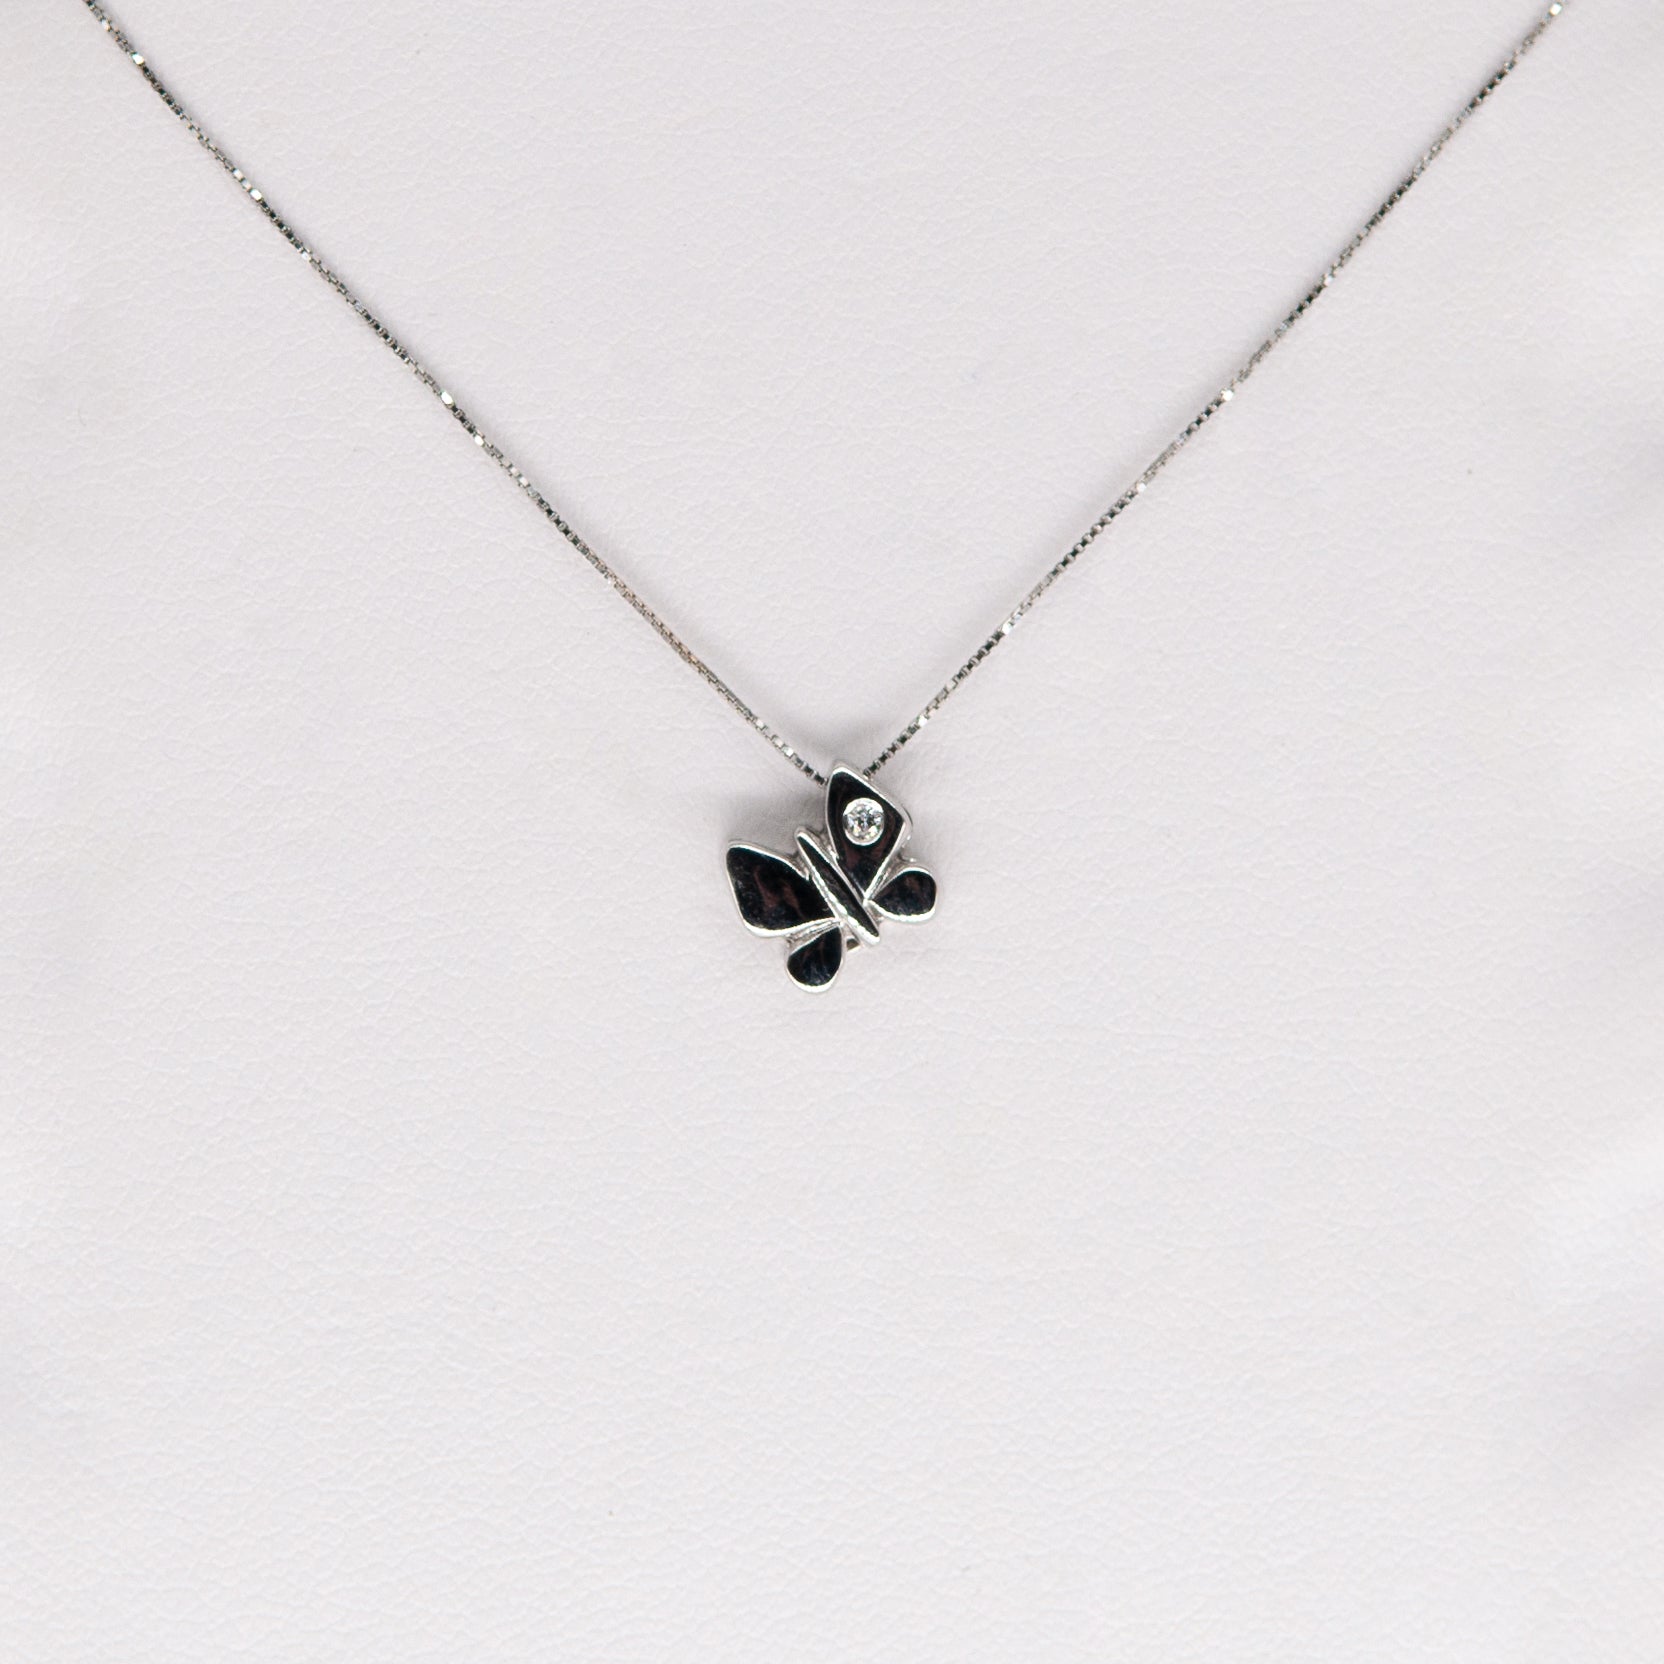 Little butterfly necklace with diamond